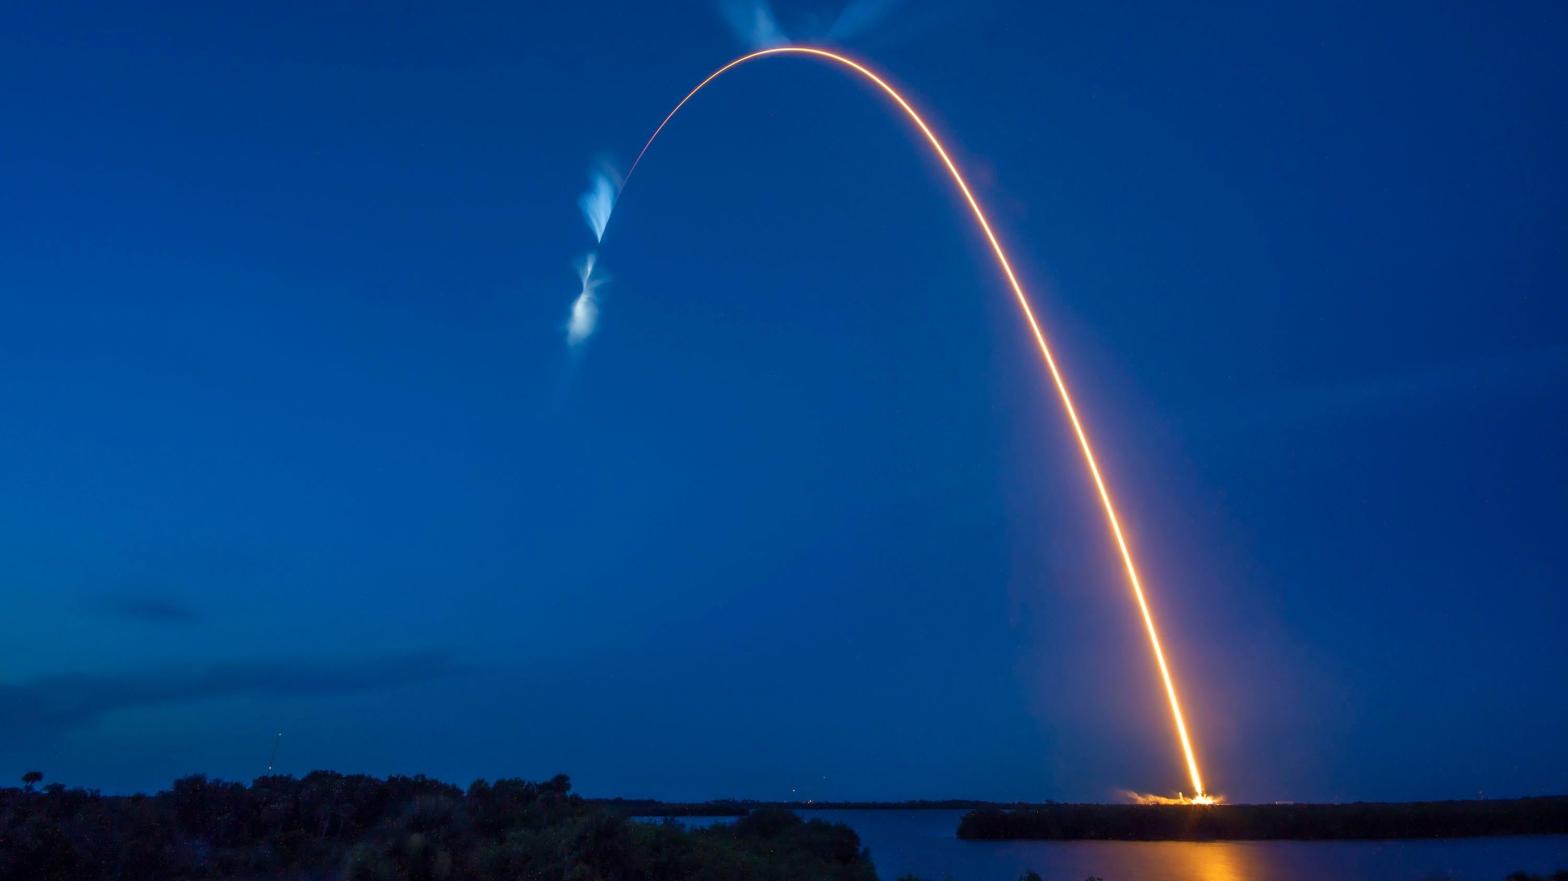 SpaceX's 25th commercial resupply cargo mission lifting off on July 14, 2022. (Photo: SpaceX)